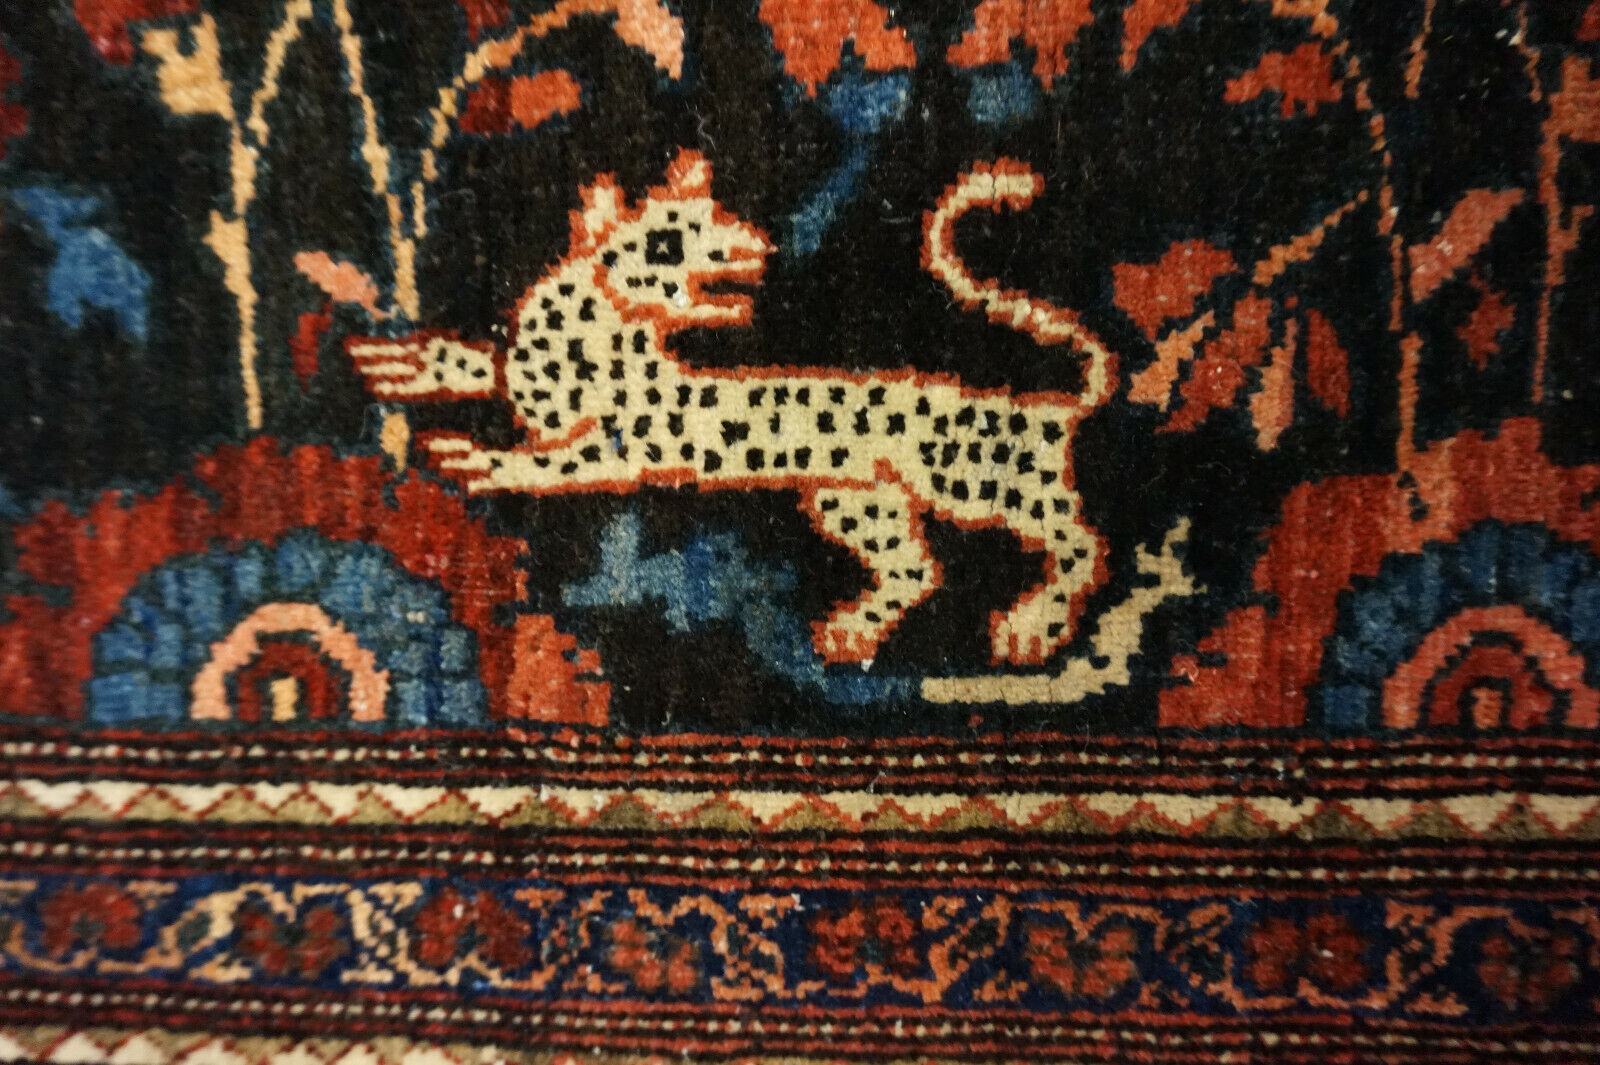 Overhead shot of the Handmade Antique Persian Tehran Rug displaying size and dimensions